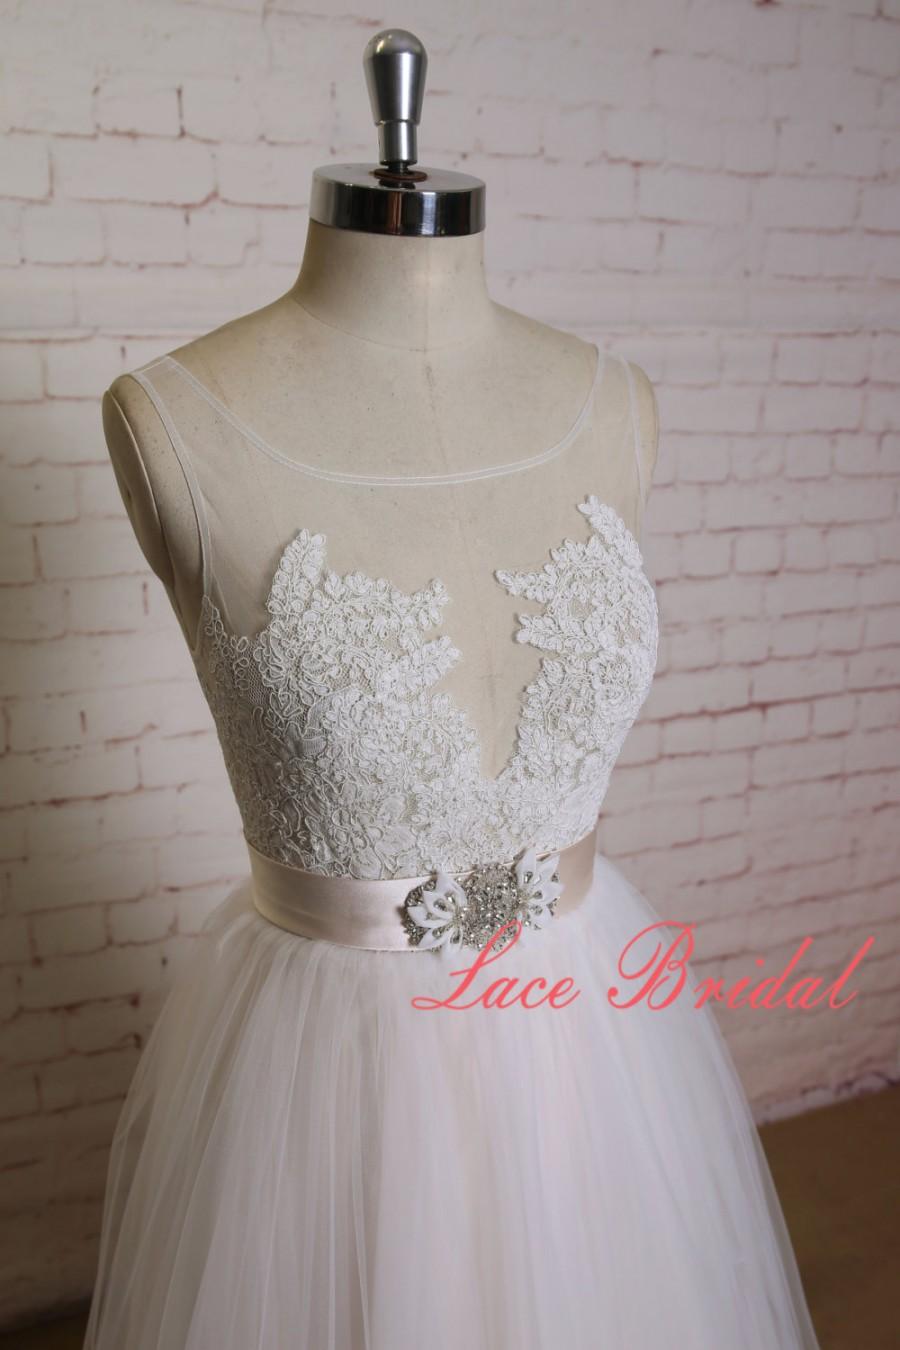 Hochzeit - Sheer Lace Bodice Wedding Dress with Illusion Neckline Tulle Skirt Bridal Gown with Nude Beading Belt A-line Wedding Dress with V Back